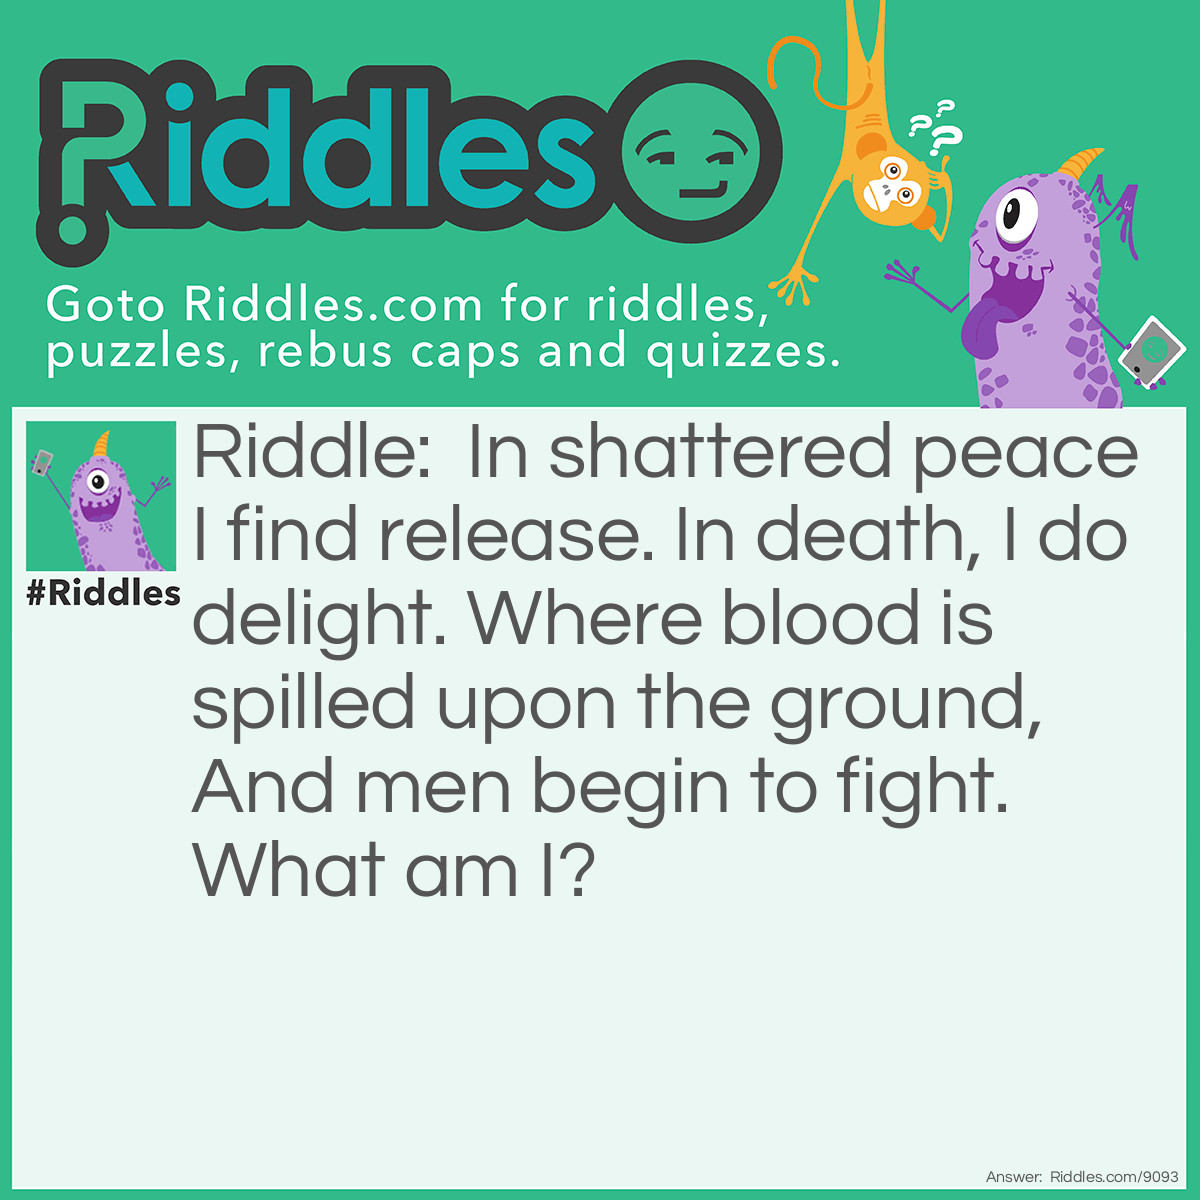 Riddle: In shattered peace I find release. In death, I do delight. Where blood is spilled upon the ground, And men begin to fight. What am I? Answer: War.